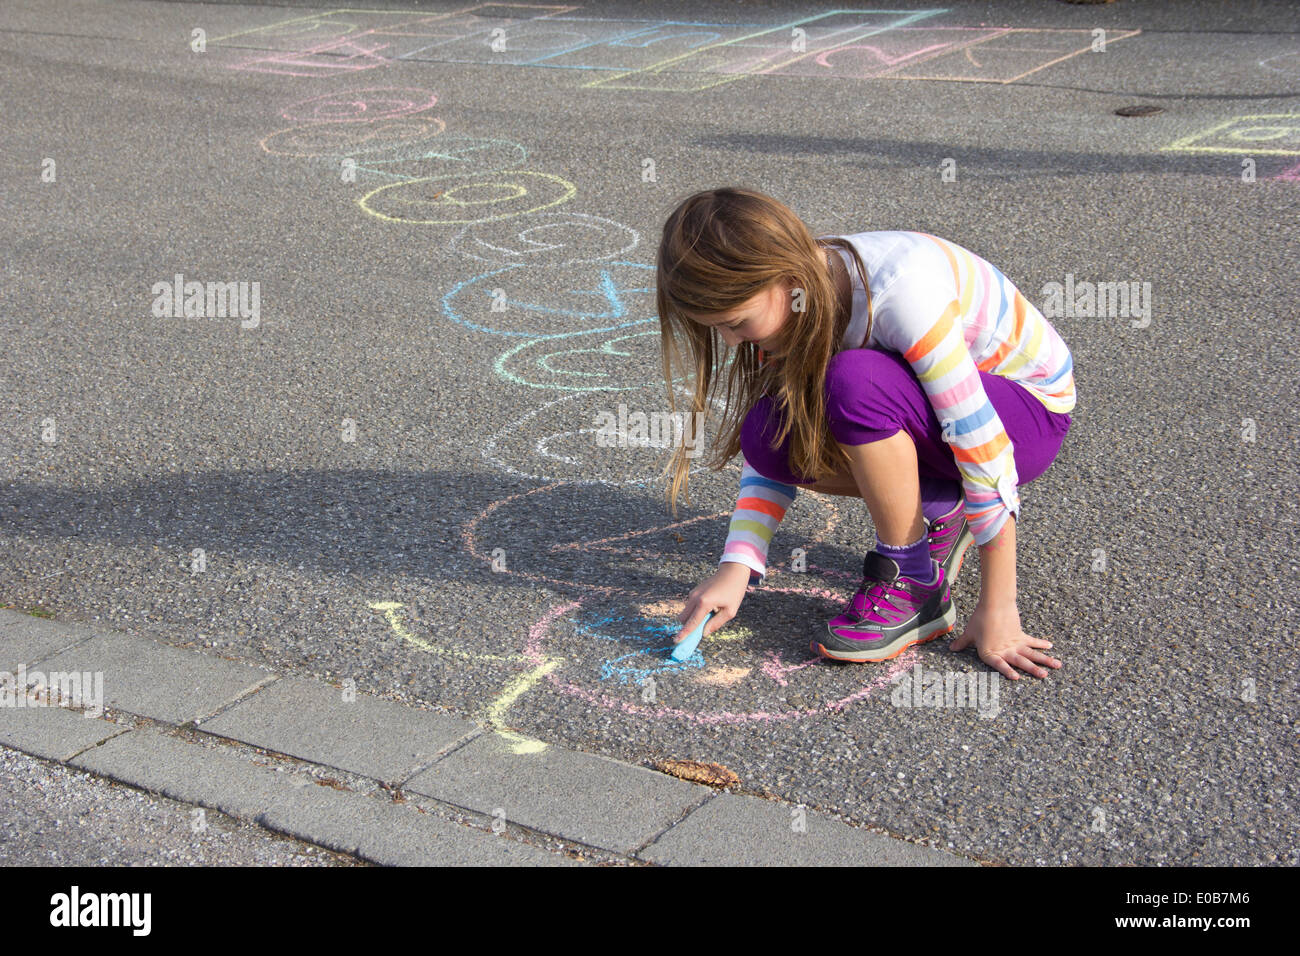 Girl drawing with coloured crayon on asphalt Stock Photo